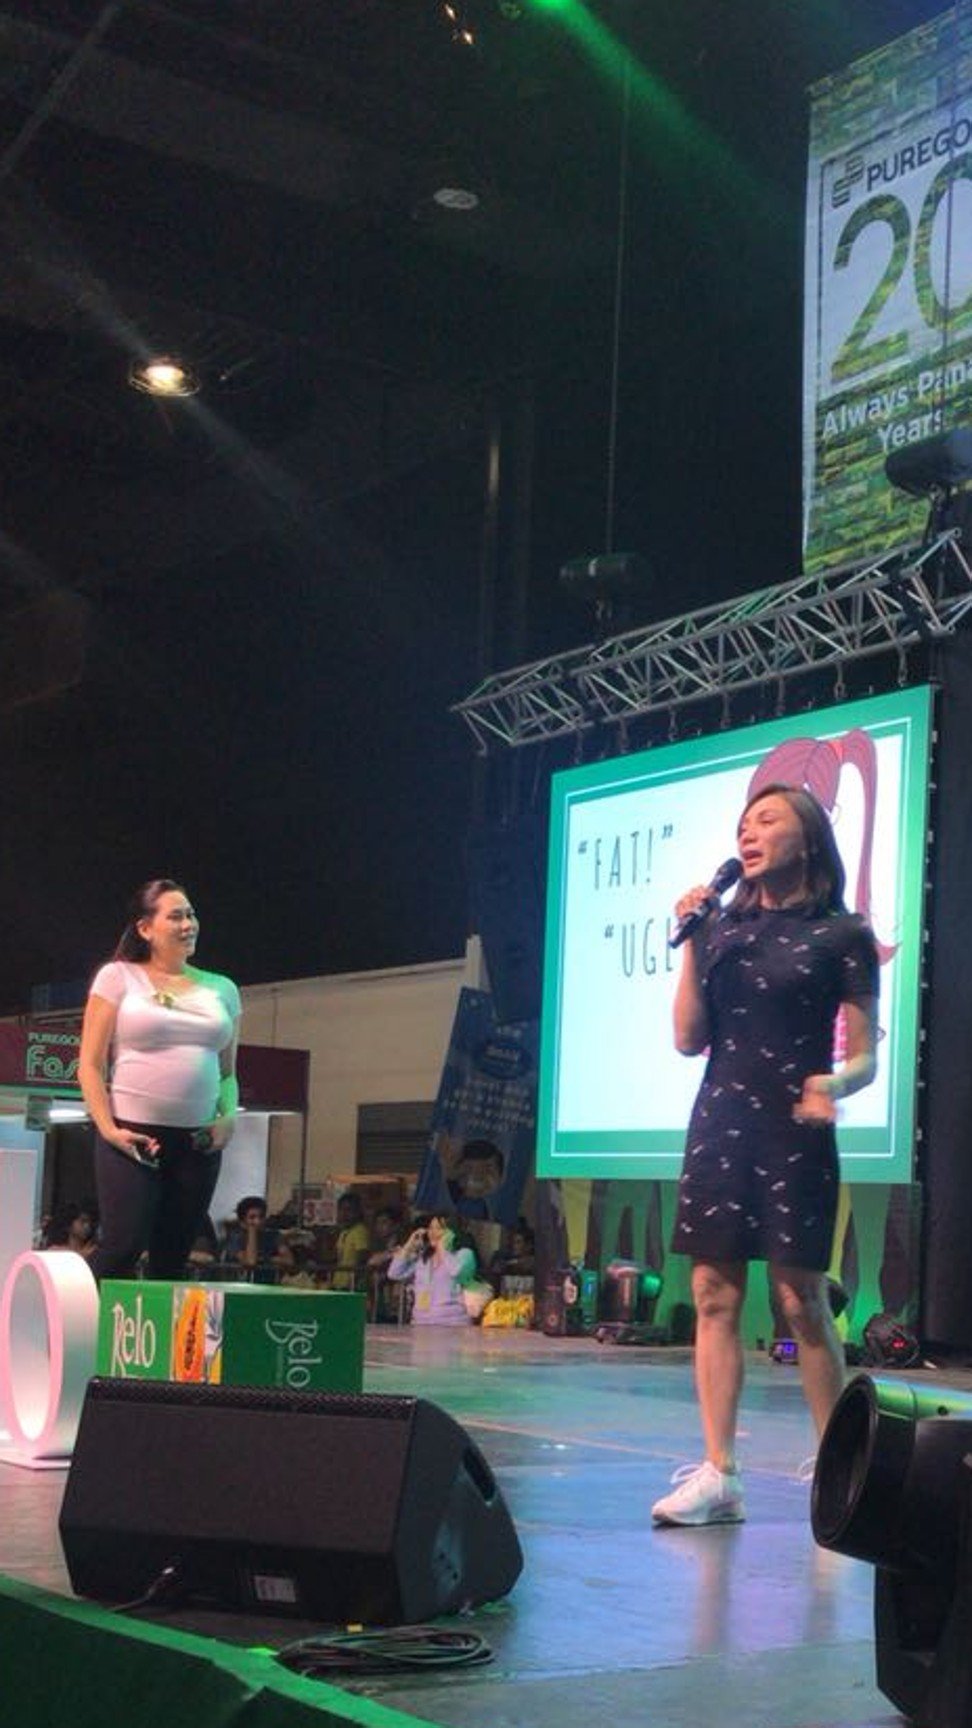 Vicki Belo and her daughter Cristalle at a community event in Manila.